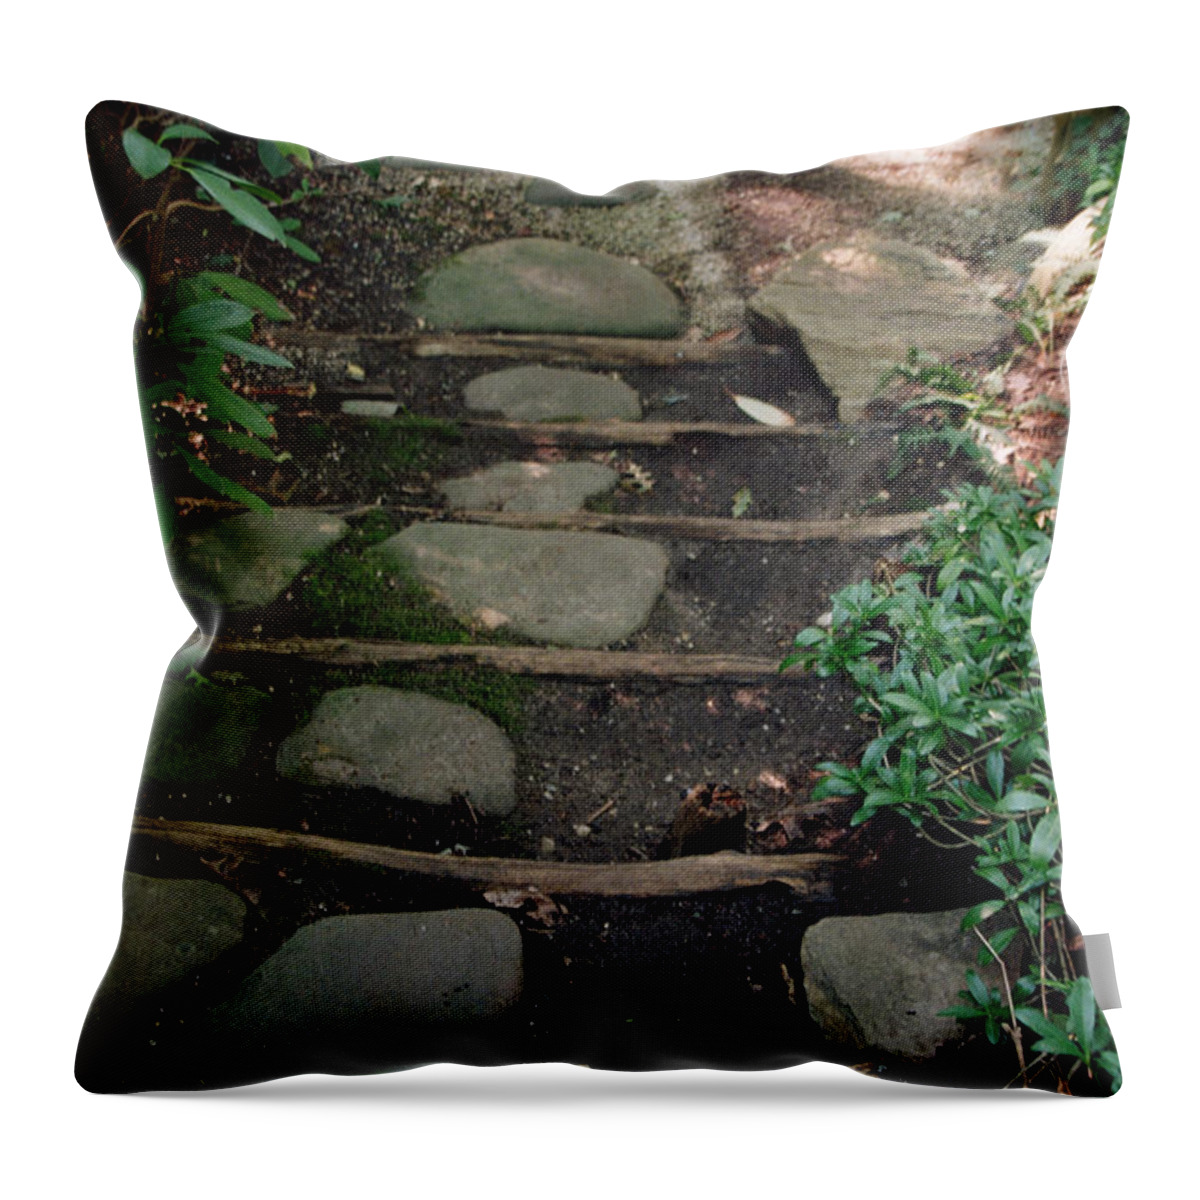 Landscape Throw Pillow featuring the photograph Dnrs1003 by Henry Butz